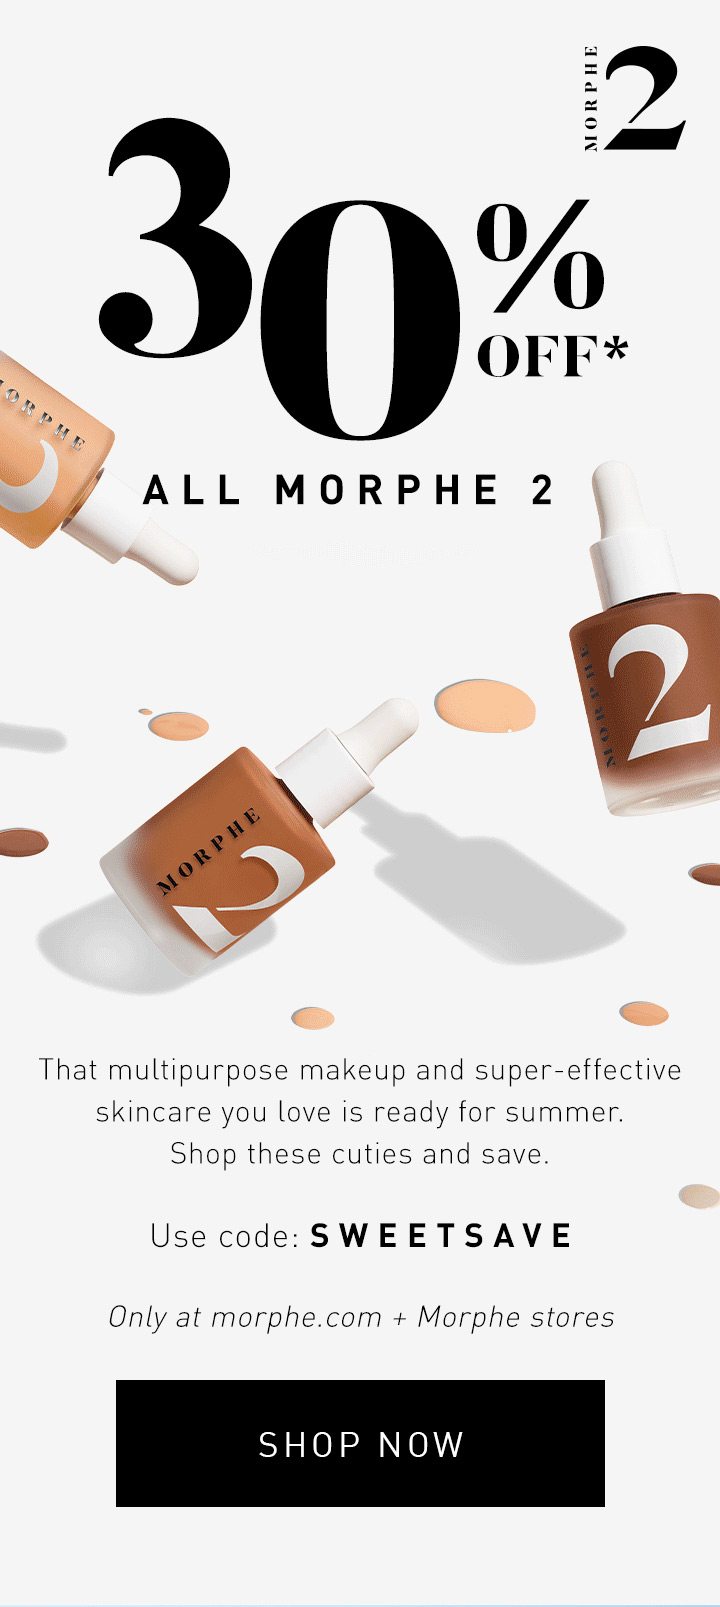 ENDS SOON 30% OFF* ALL MORPHE 2 That multipurpose makeup and super-effective skincare you love is ready for summer. Shop these cuties and save. Only at morphe.com + Morphe stores USE CODE: SWEETSAVE SHOP NOW